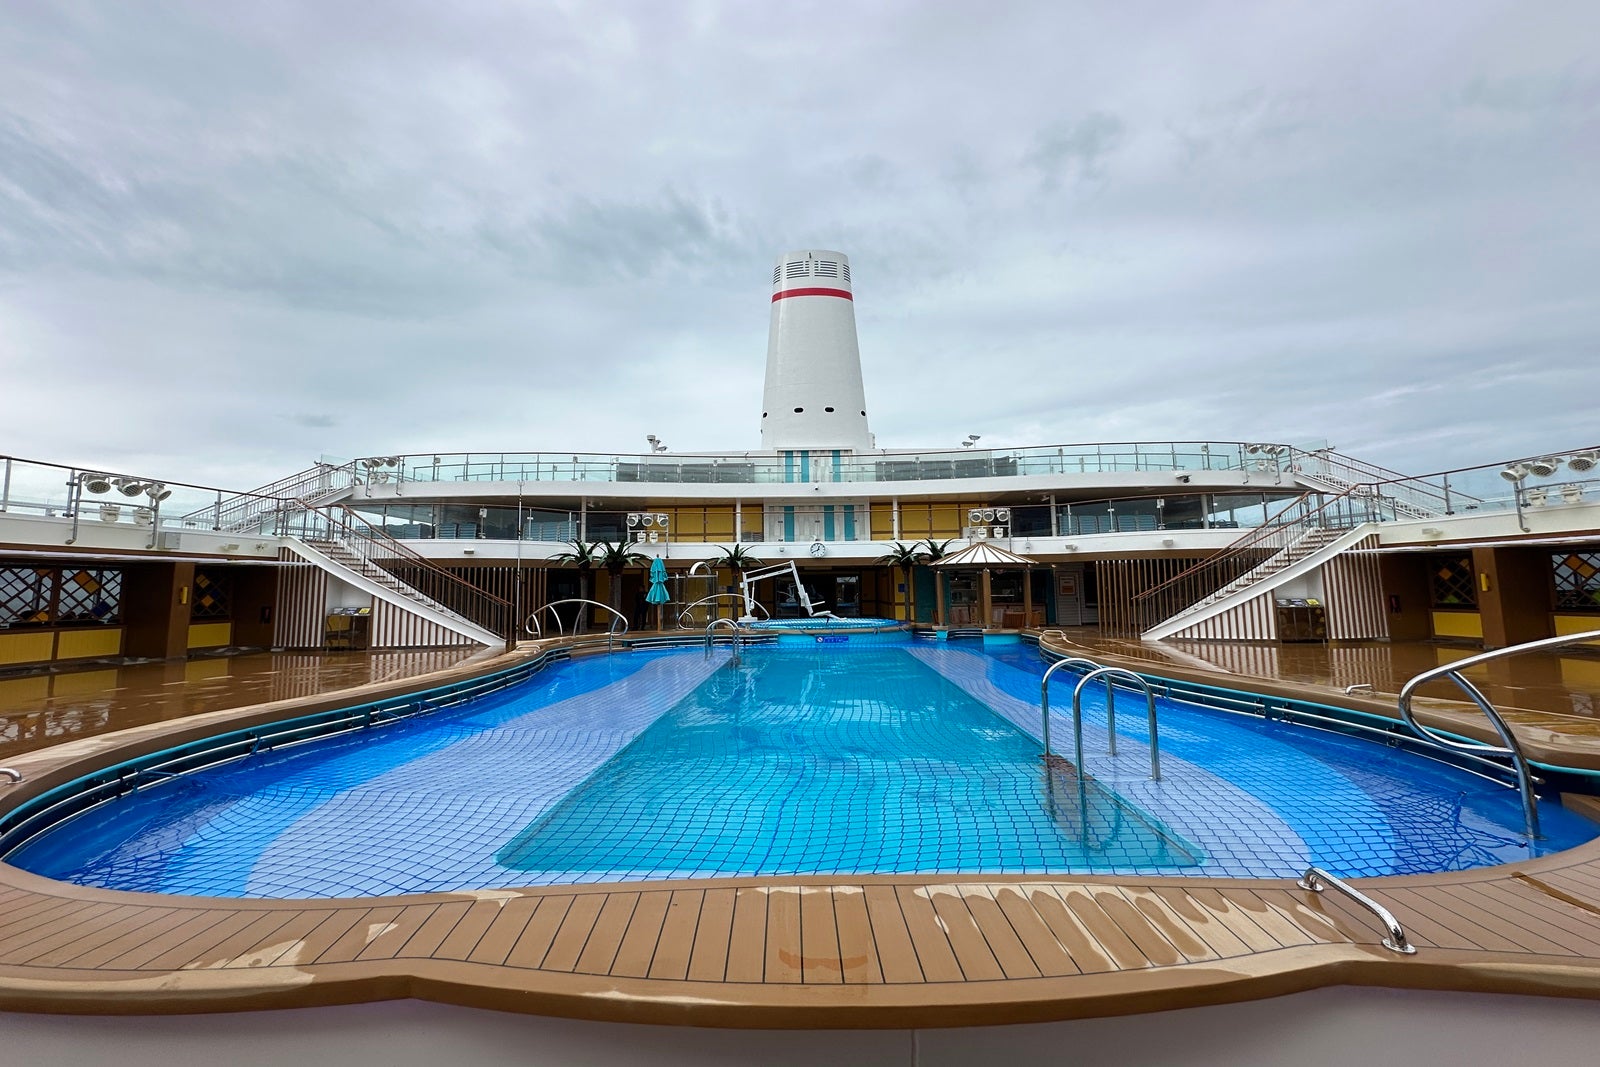 A cruise ship pool with smokestacks in the background